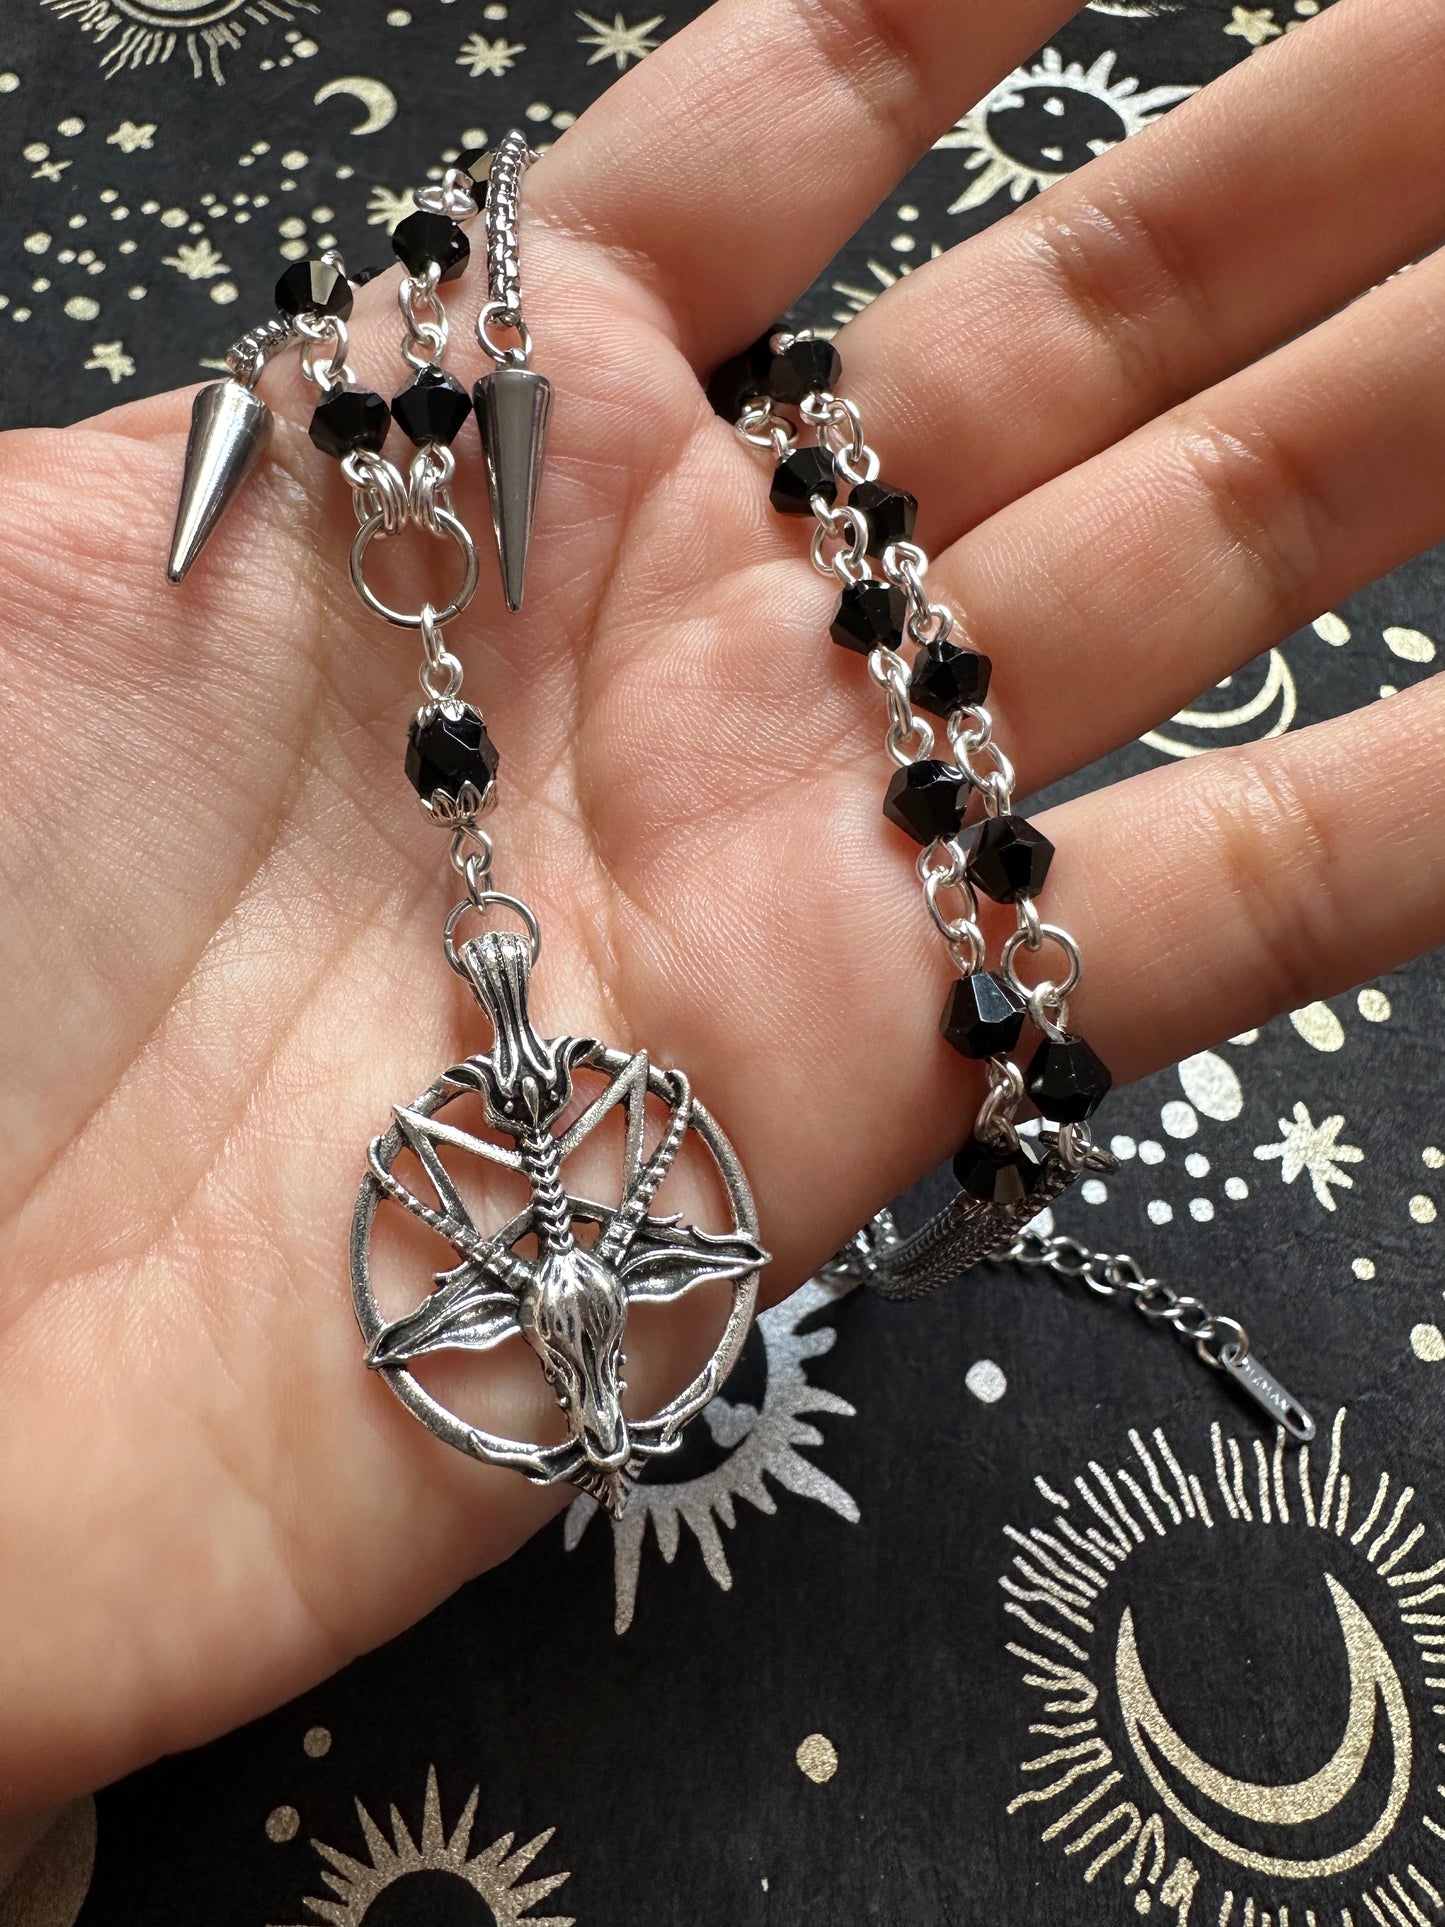 Sigil of Baphomet choker with spikes